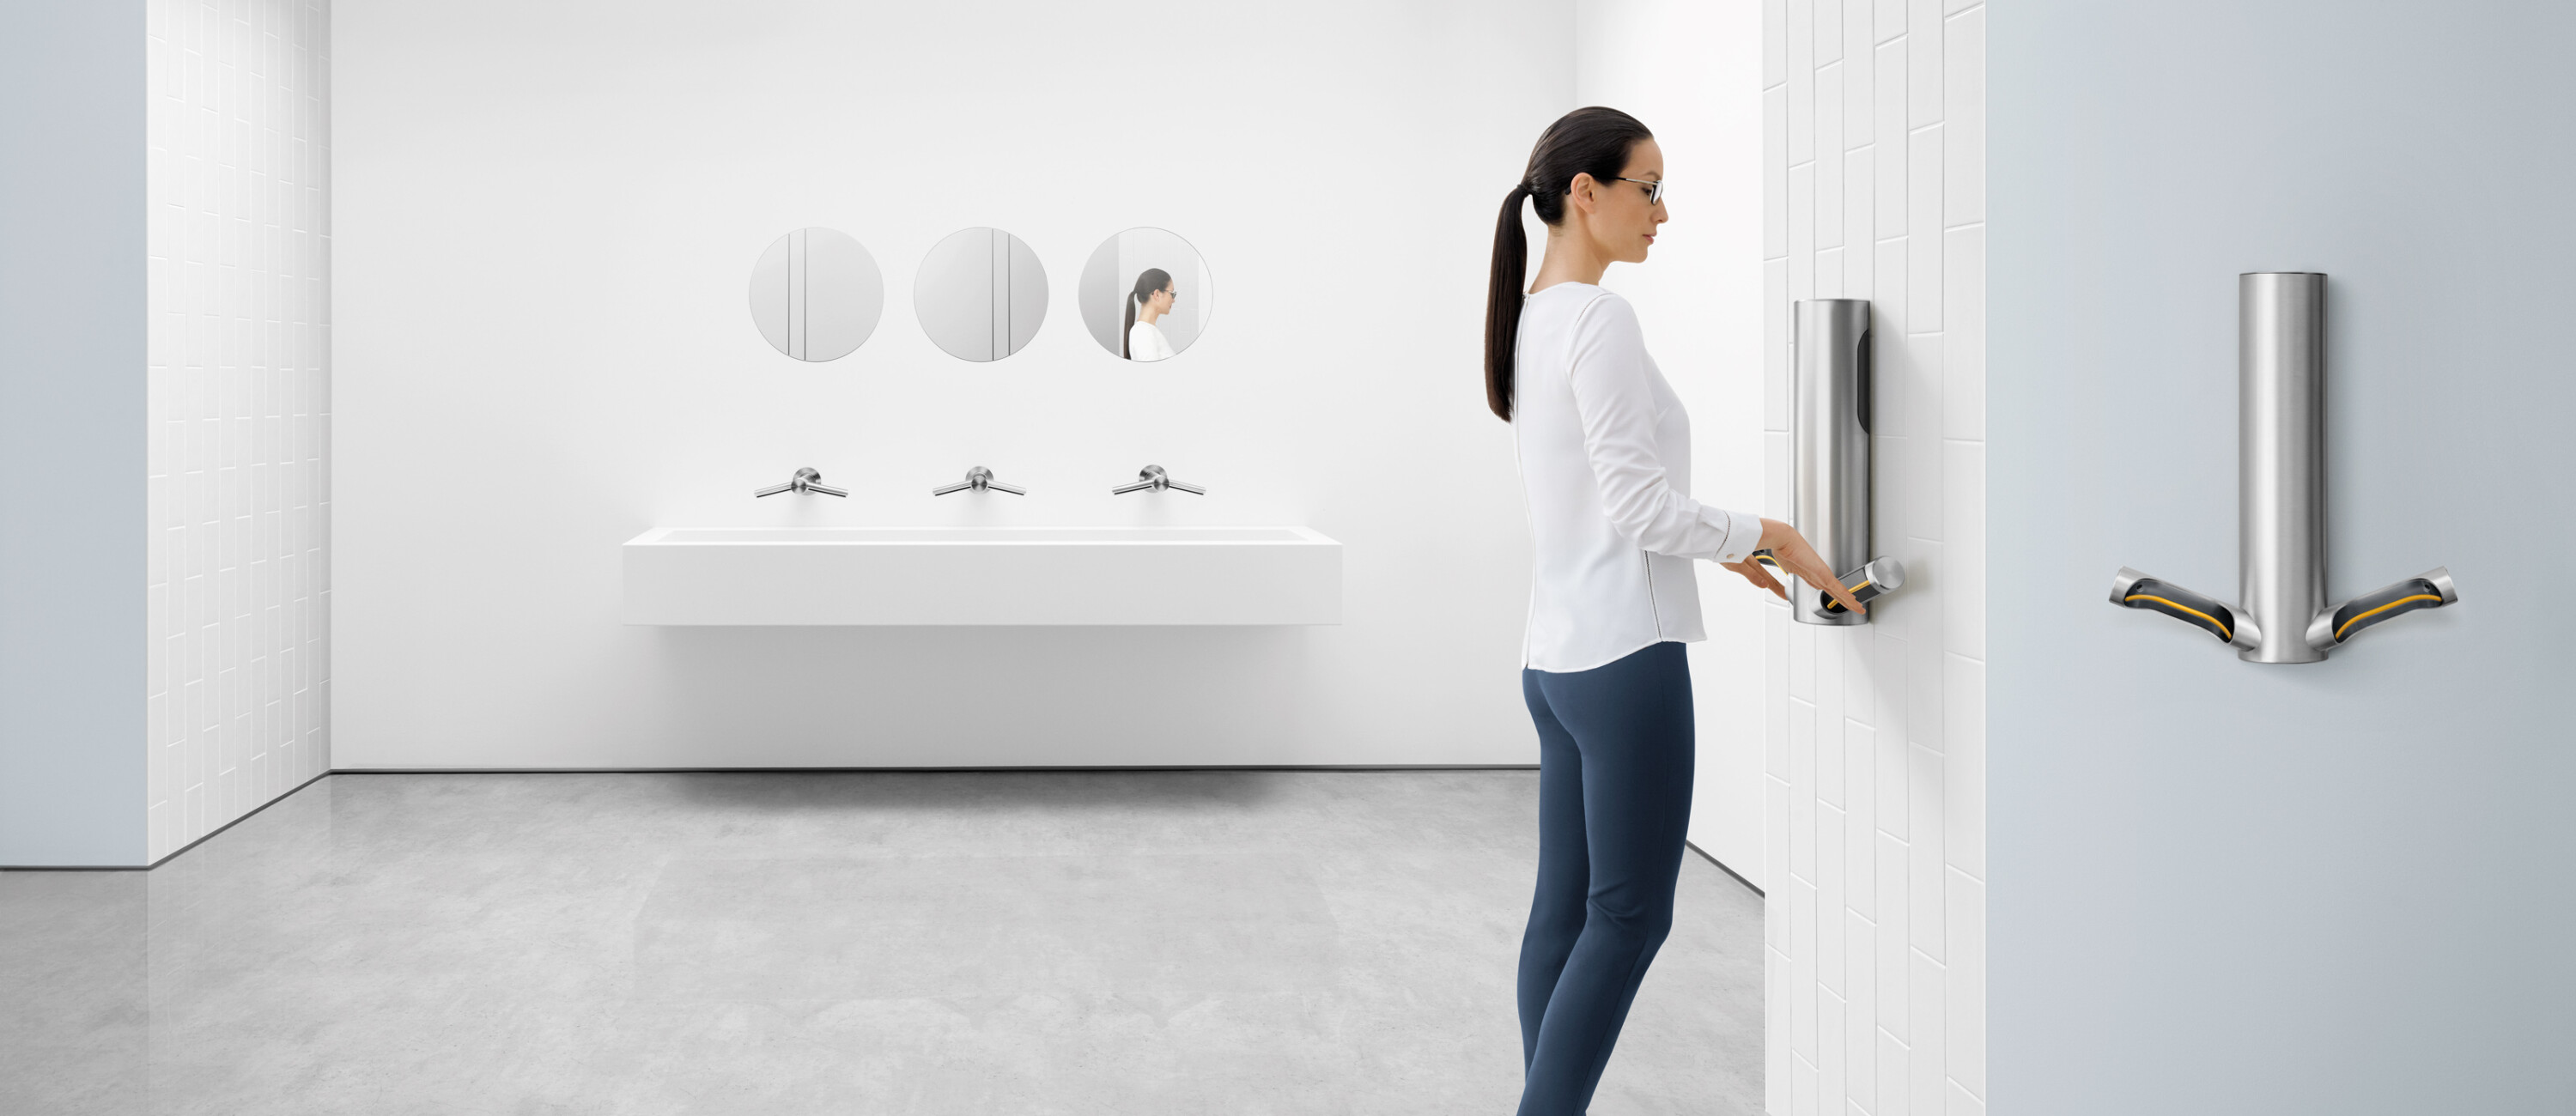 A woman with a whit shirt, blue shorts and black shoes drying her hands on a Dyson Airblade Hand Dryer Model 9kJ in a white bathroom.